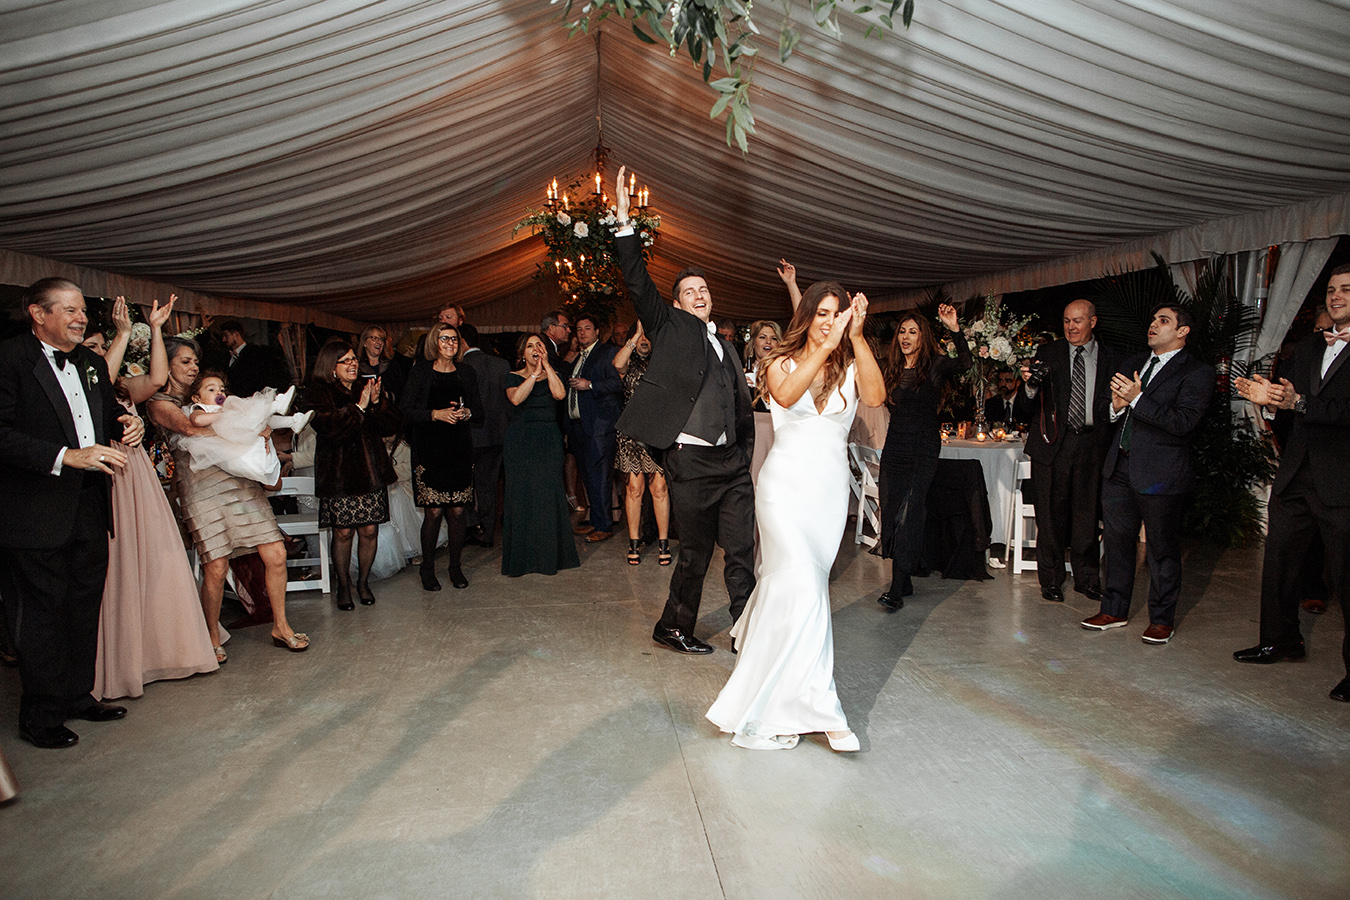 No Sicilian-inspired wedding would be complete without a performance of the “Tarantella”, a traditional Italian folk dance, at the reception.